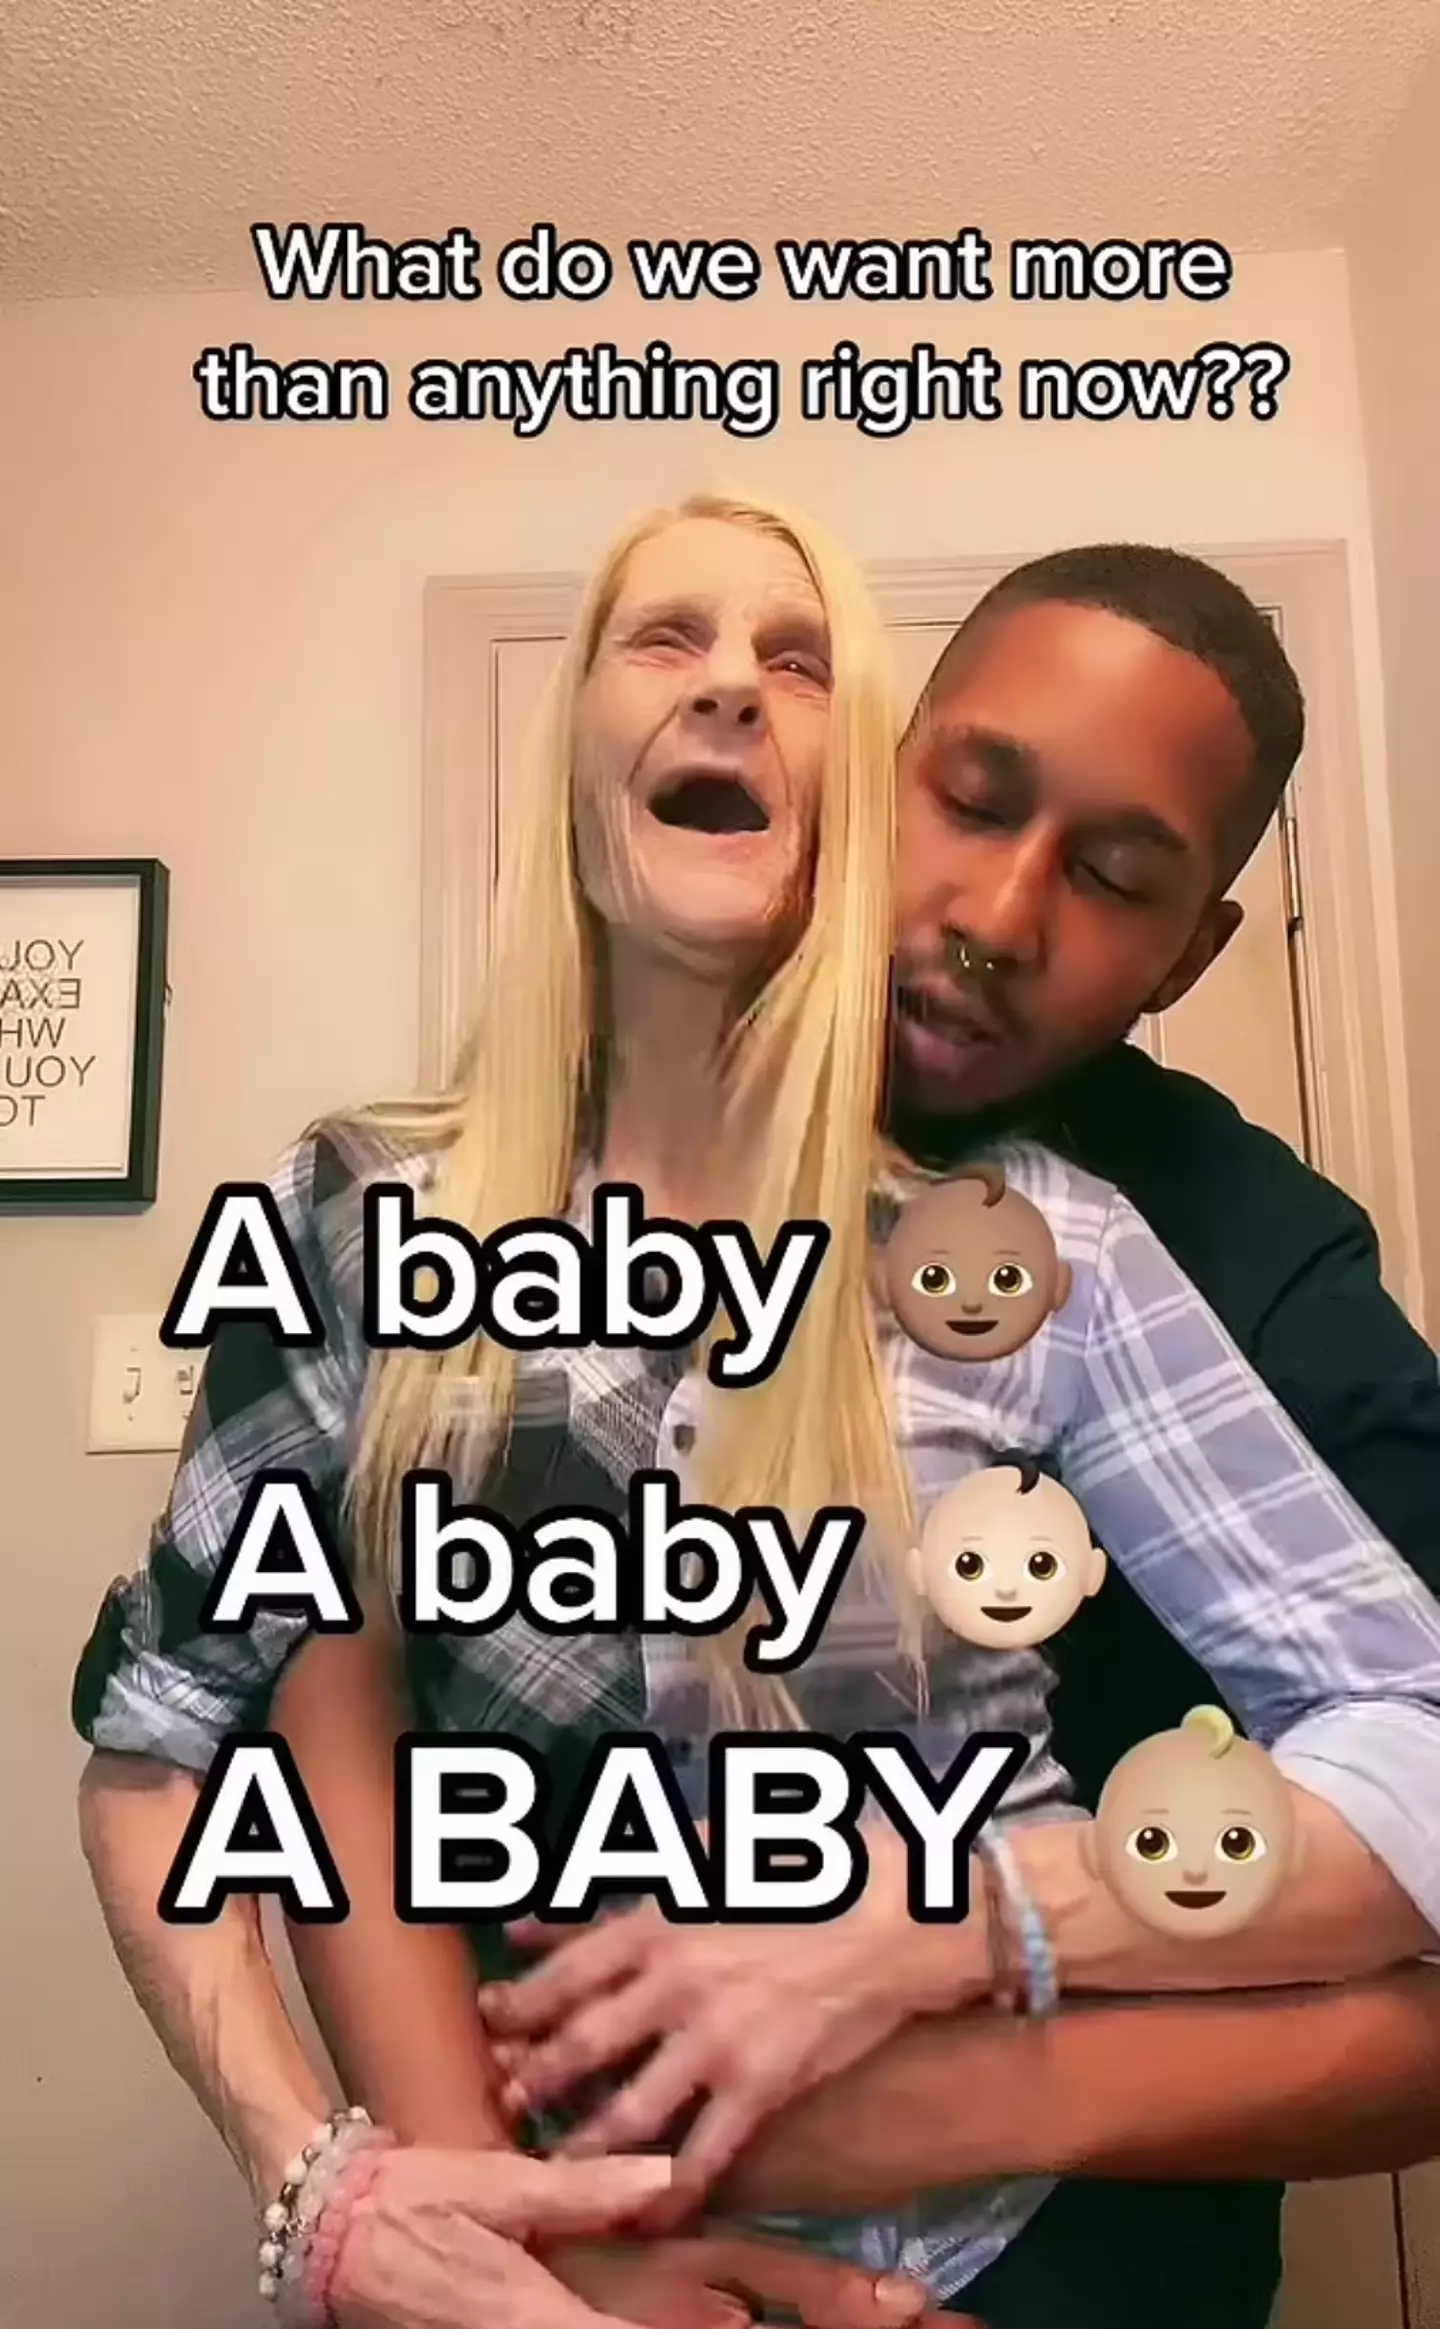 The couple want a baby.